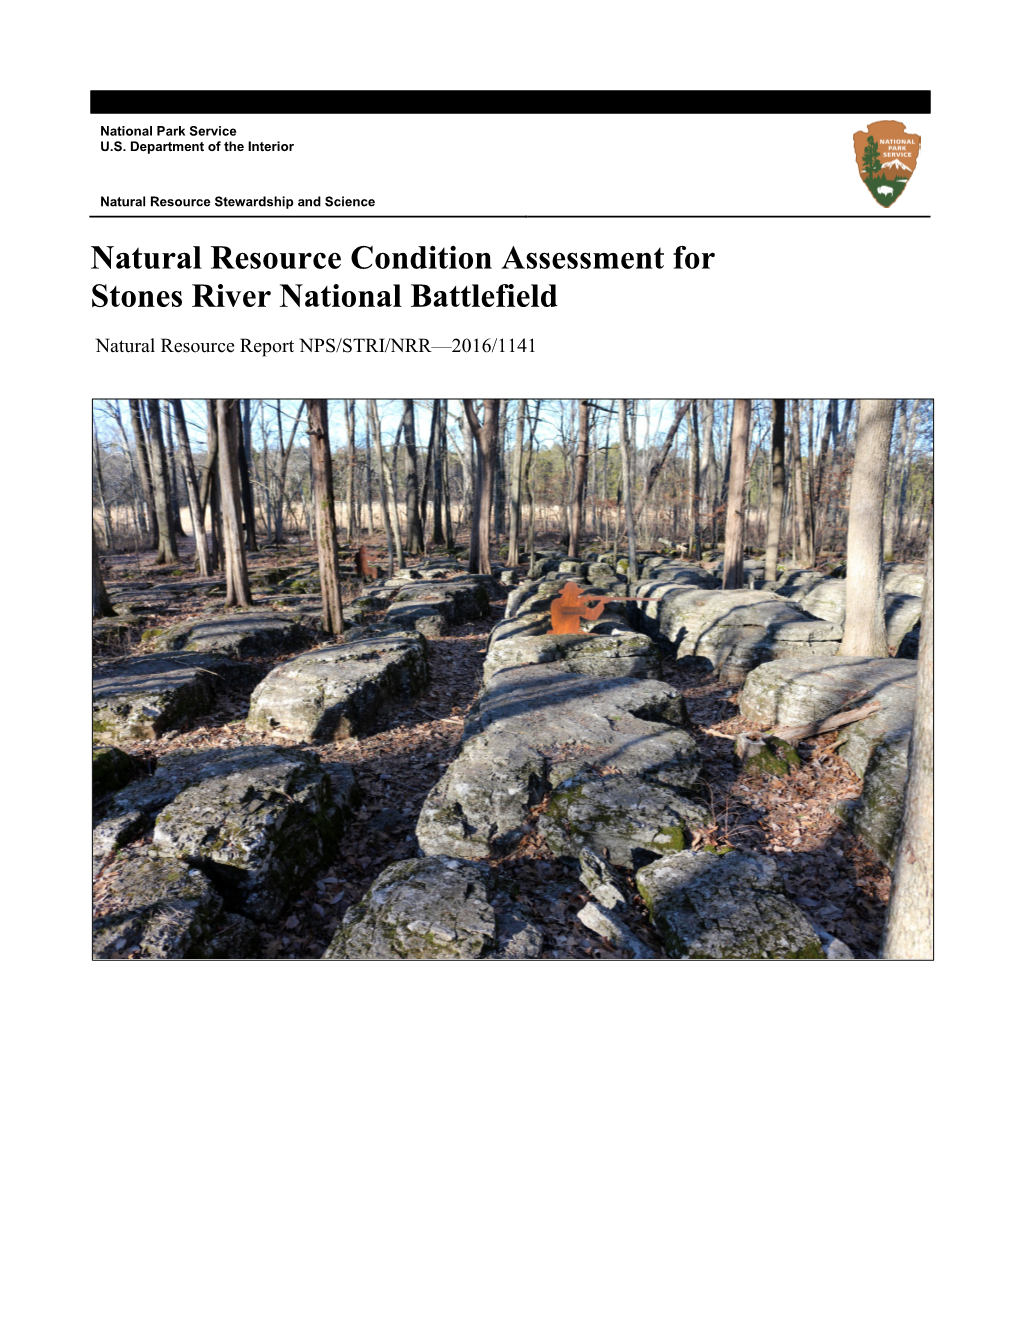 Natural Resource Condition Assessment for Stones River National Battlefield